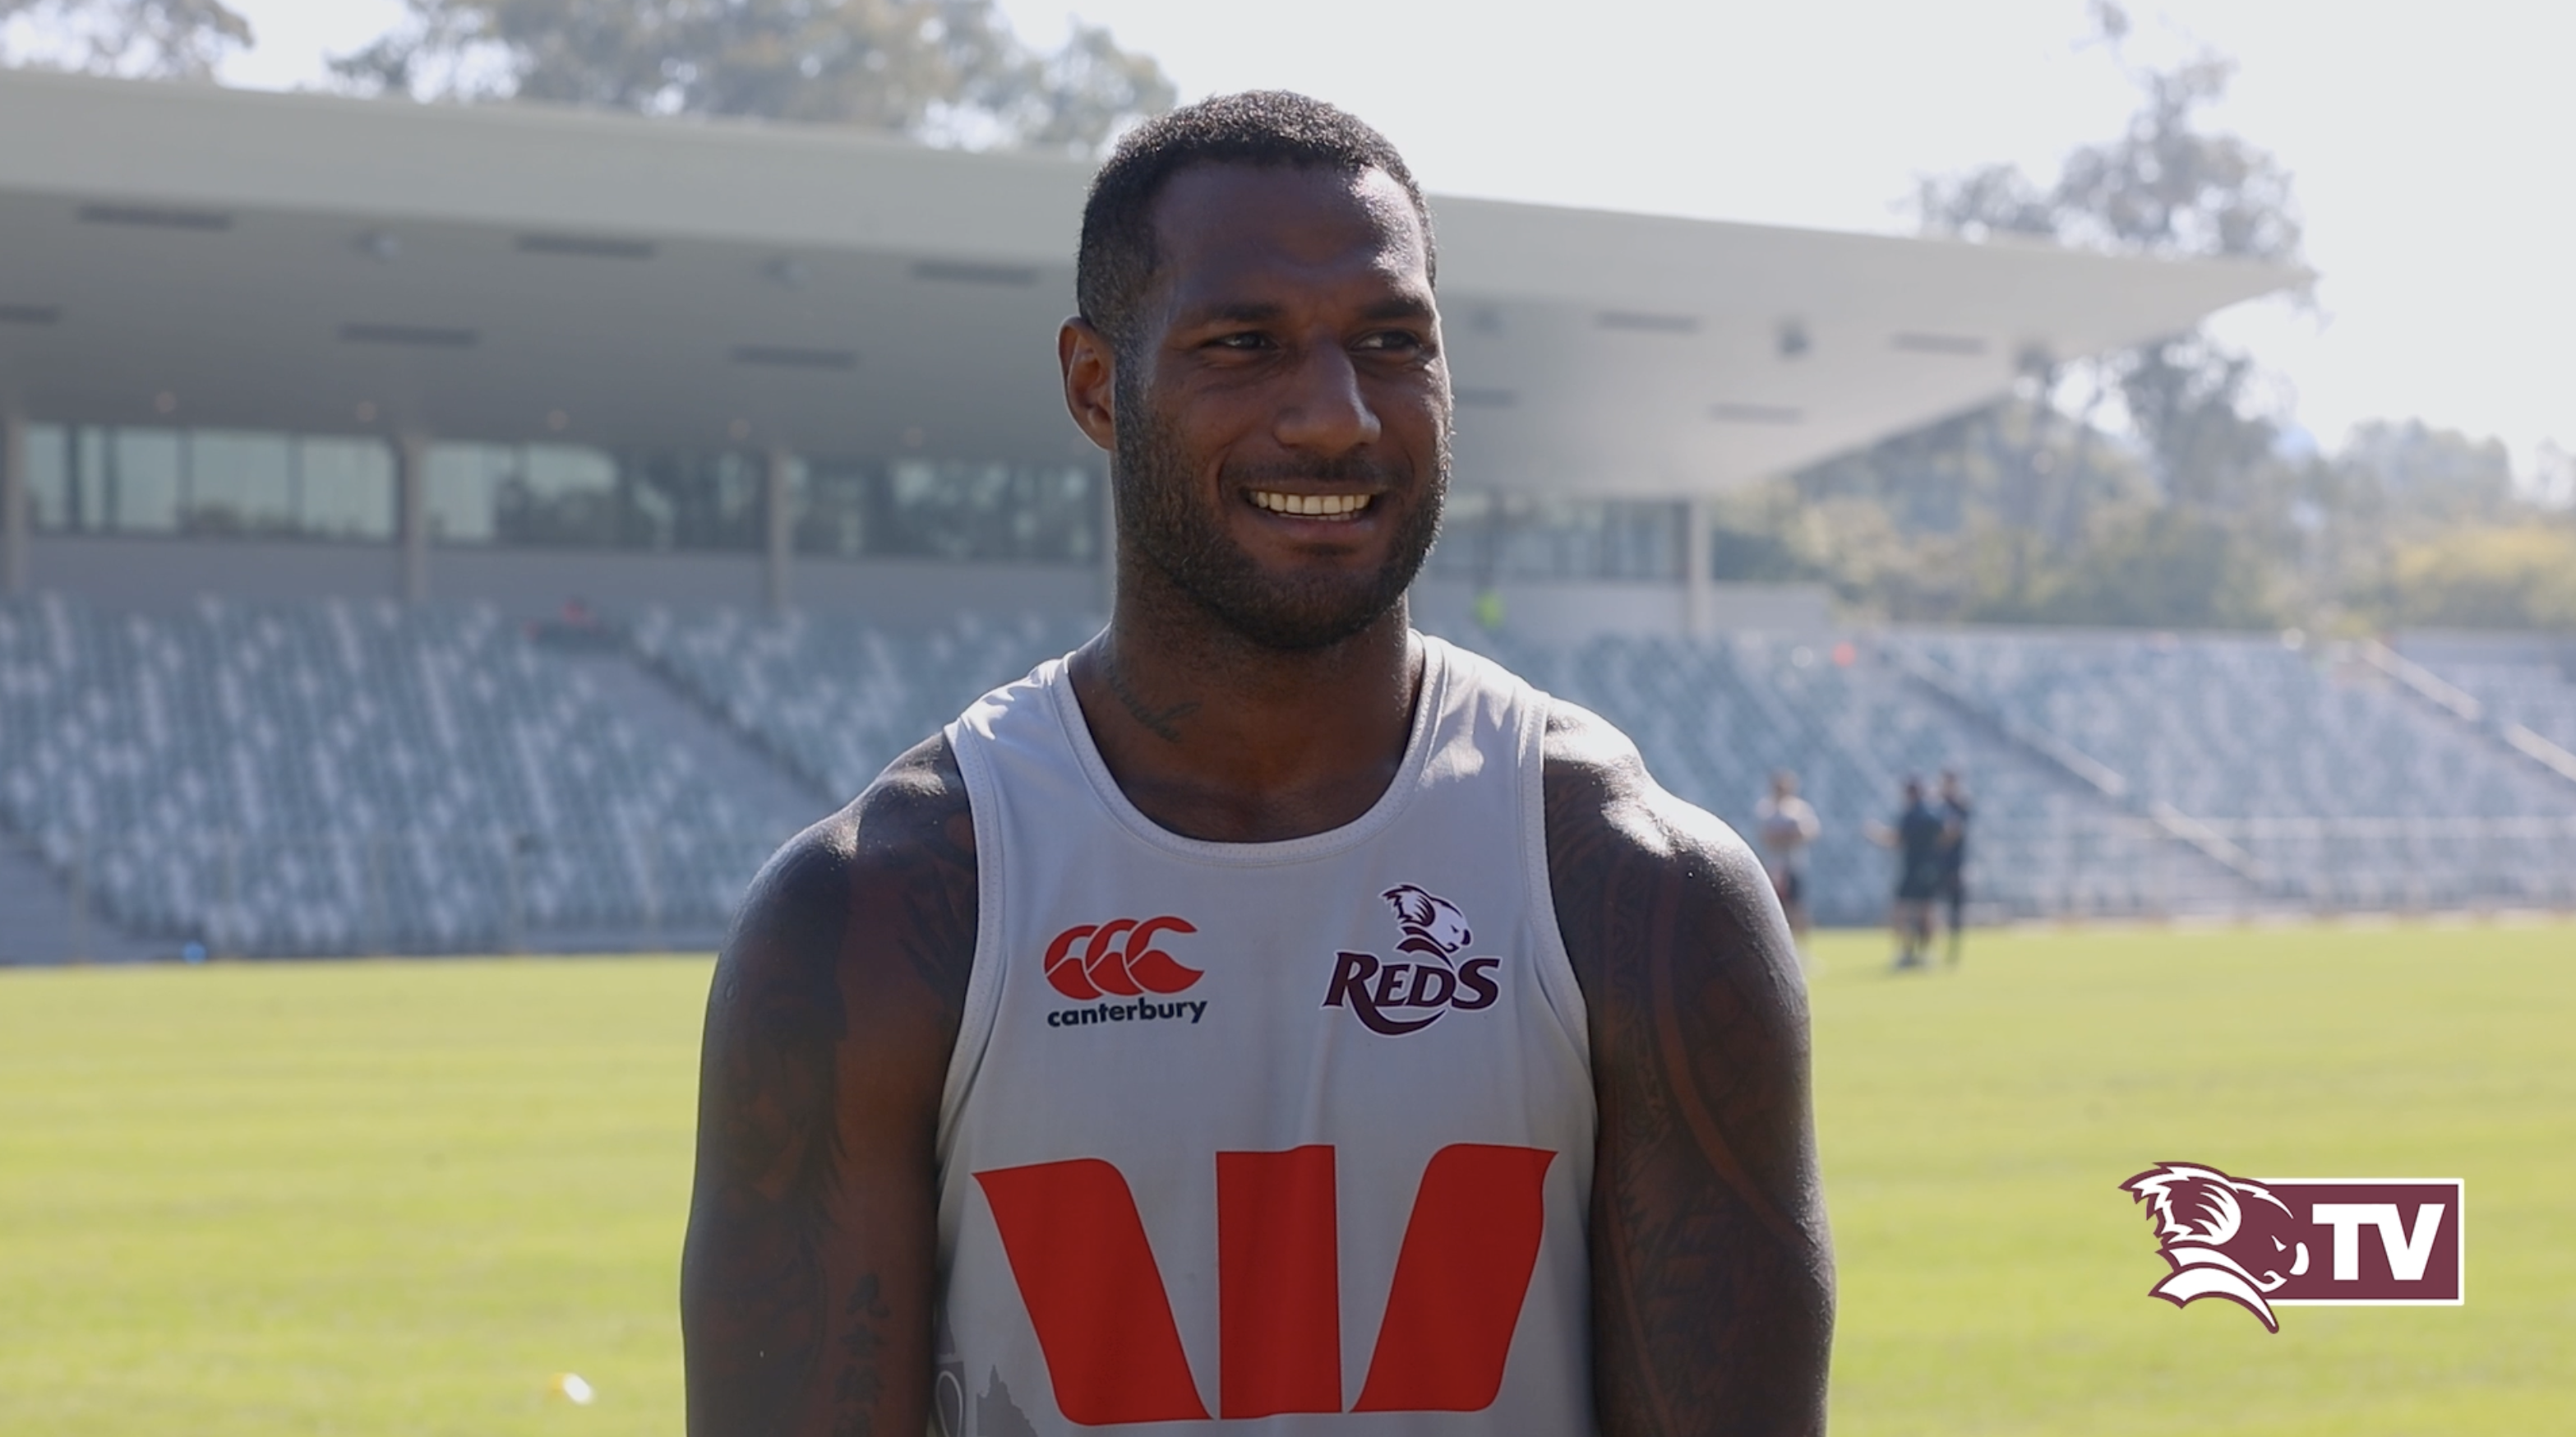 Suliasi Vunivalu re-signs with Queensland Rugby through 2025